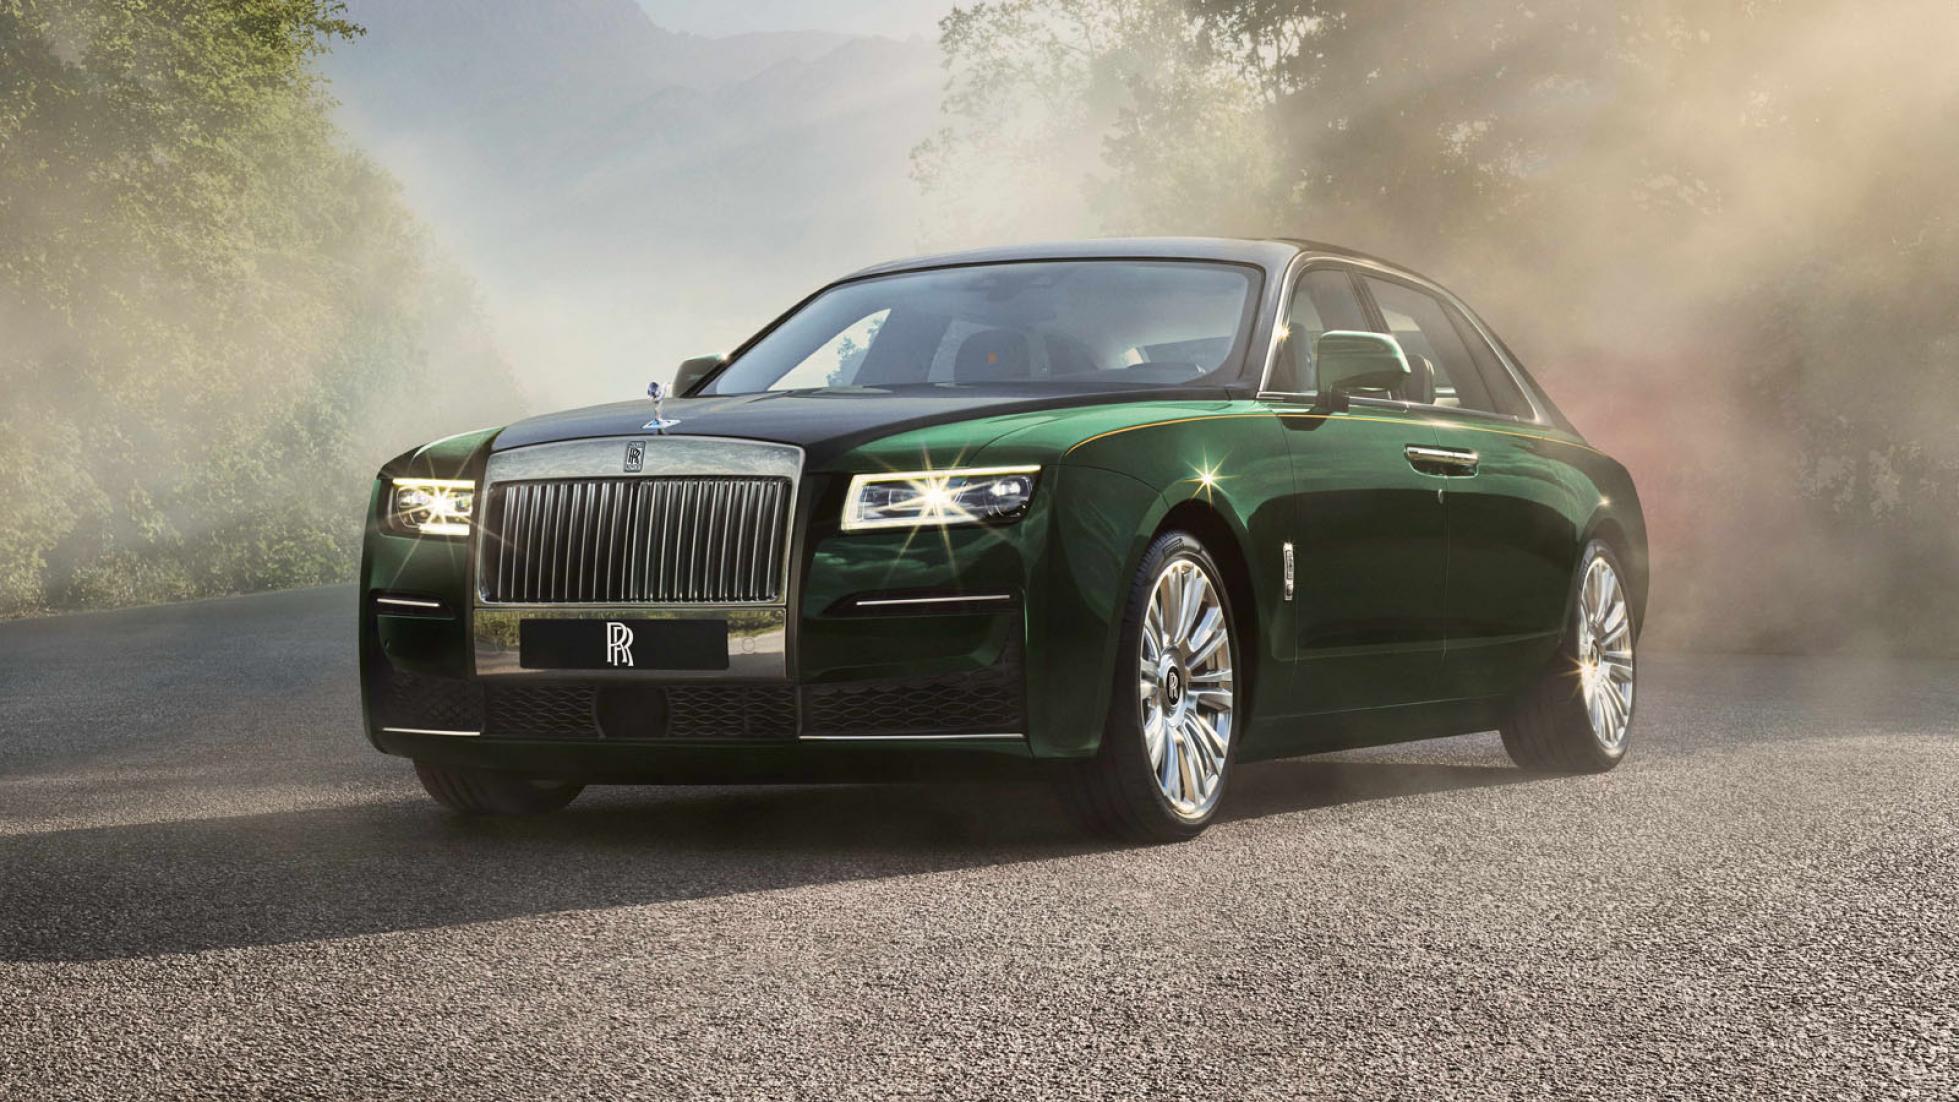 The Rolls-Royce Ghost Extended is really very long